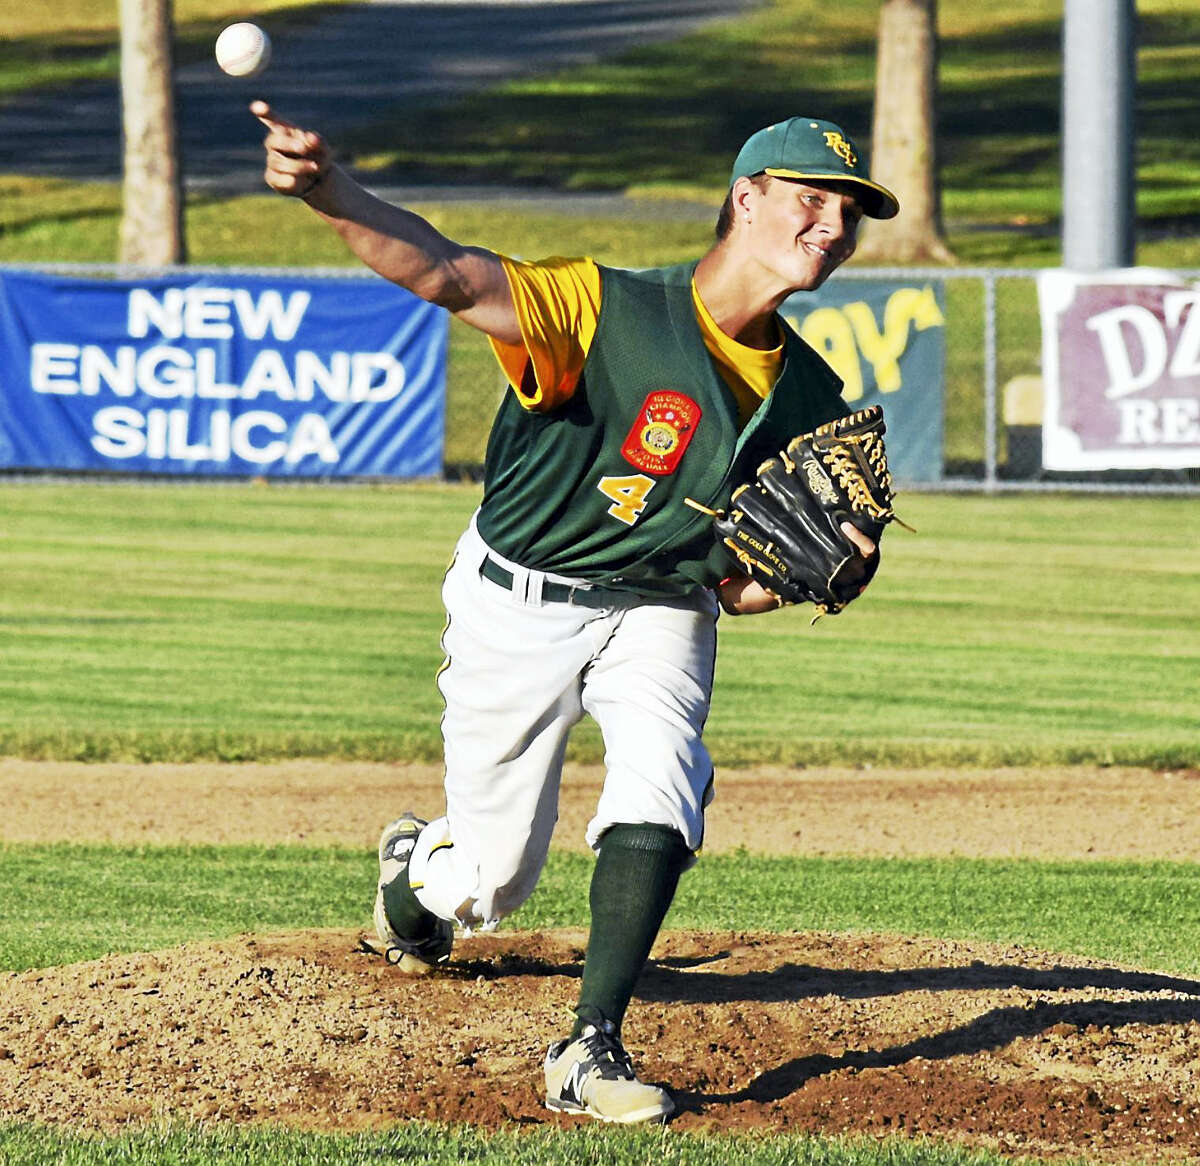 Derek Turner - Special to The Press RCP’s Tucker Lord fires a pitch during Post 105’s 6-2 victory over New London on Tuesday at Rotary Field in South Windsor.